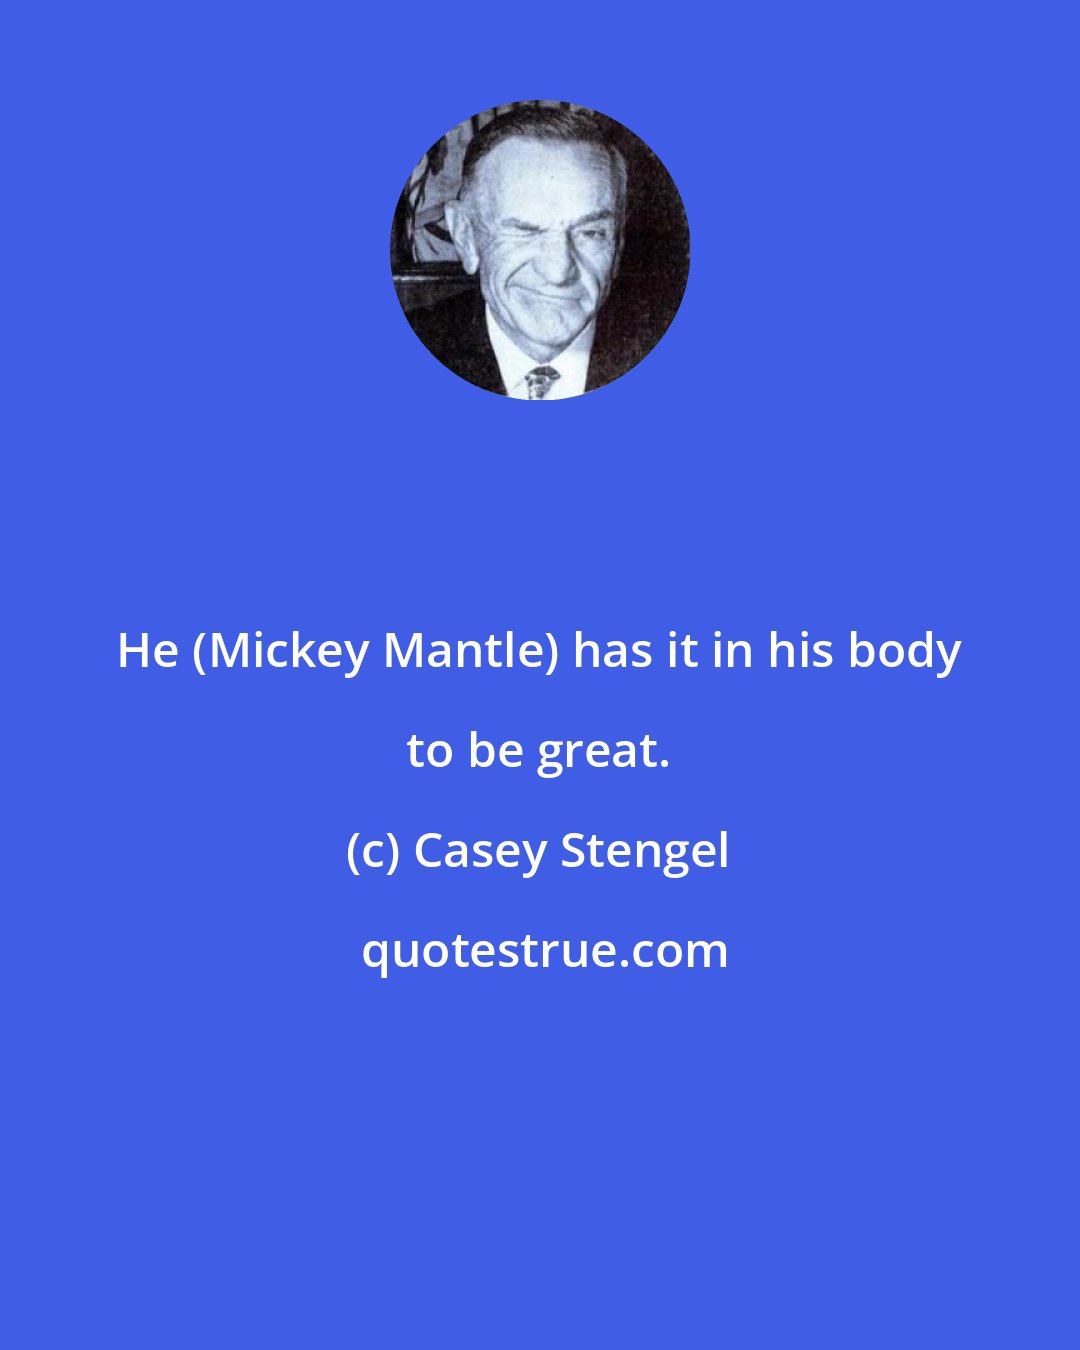 Casey Stengel: He (Mickey Mantle) has it in his body to be great.